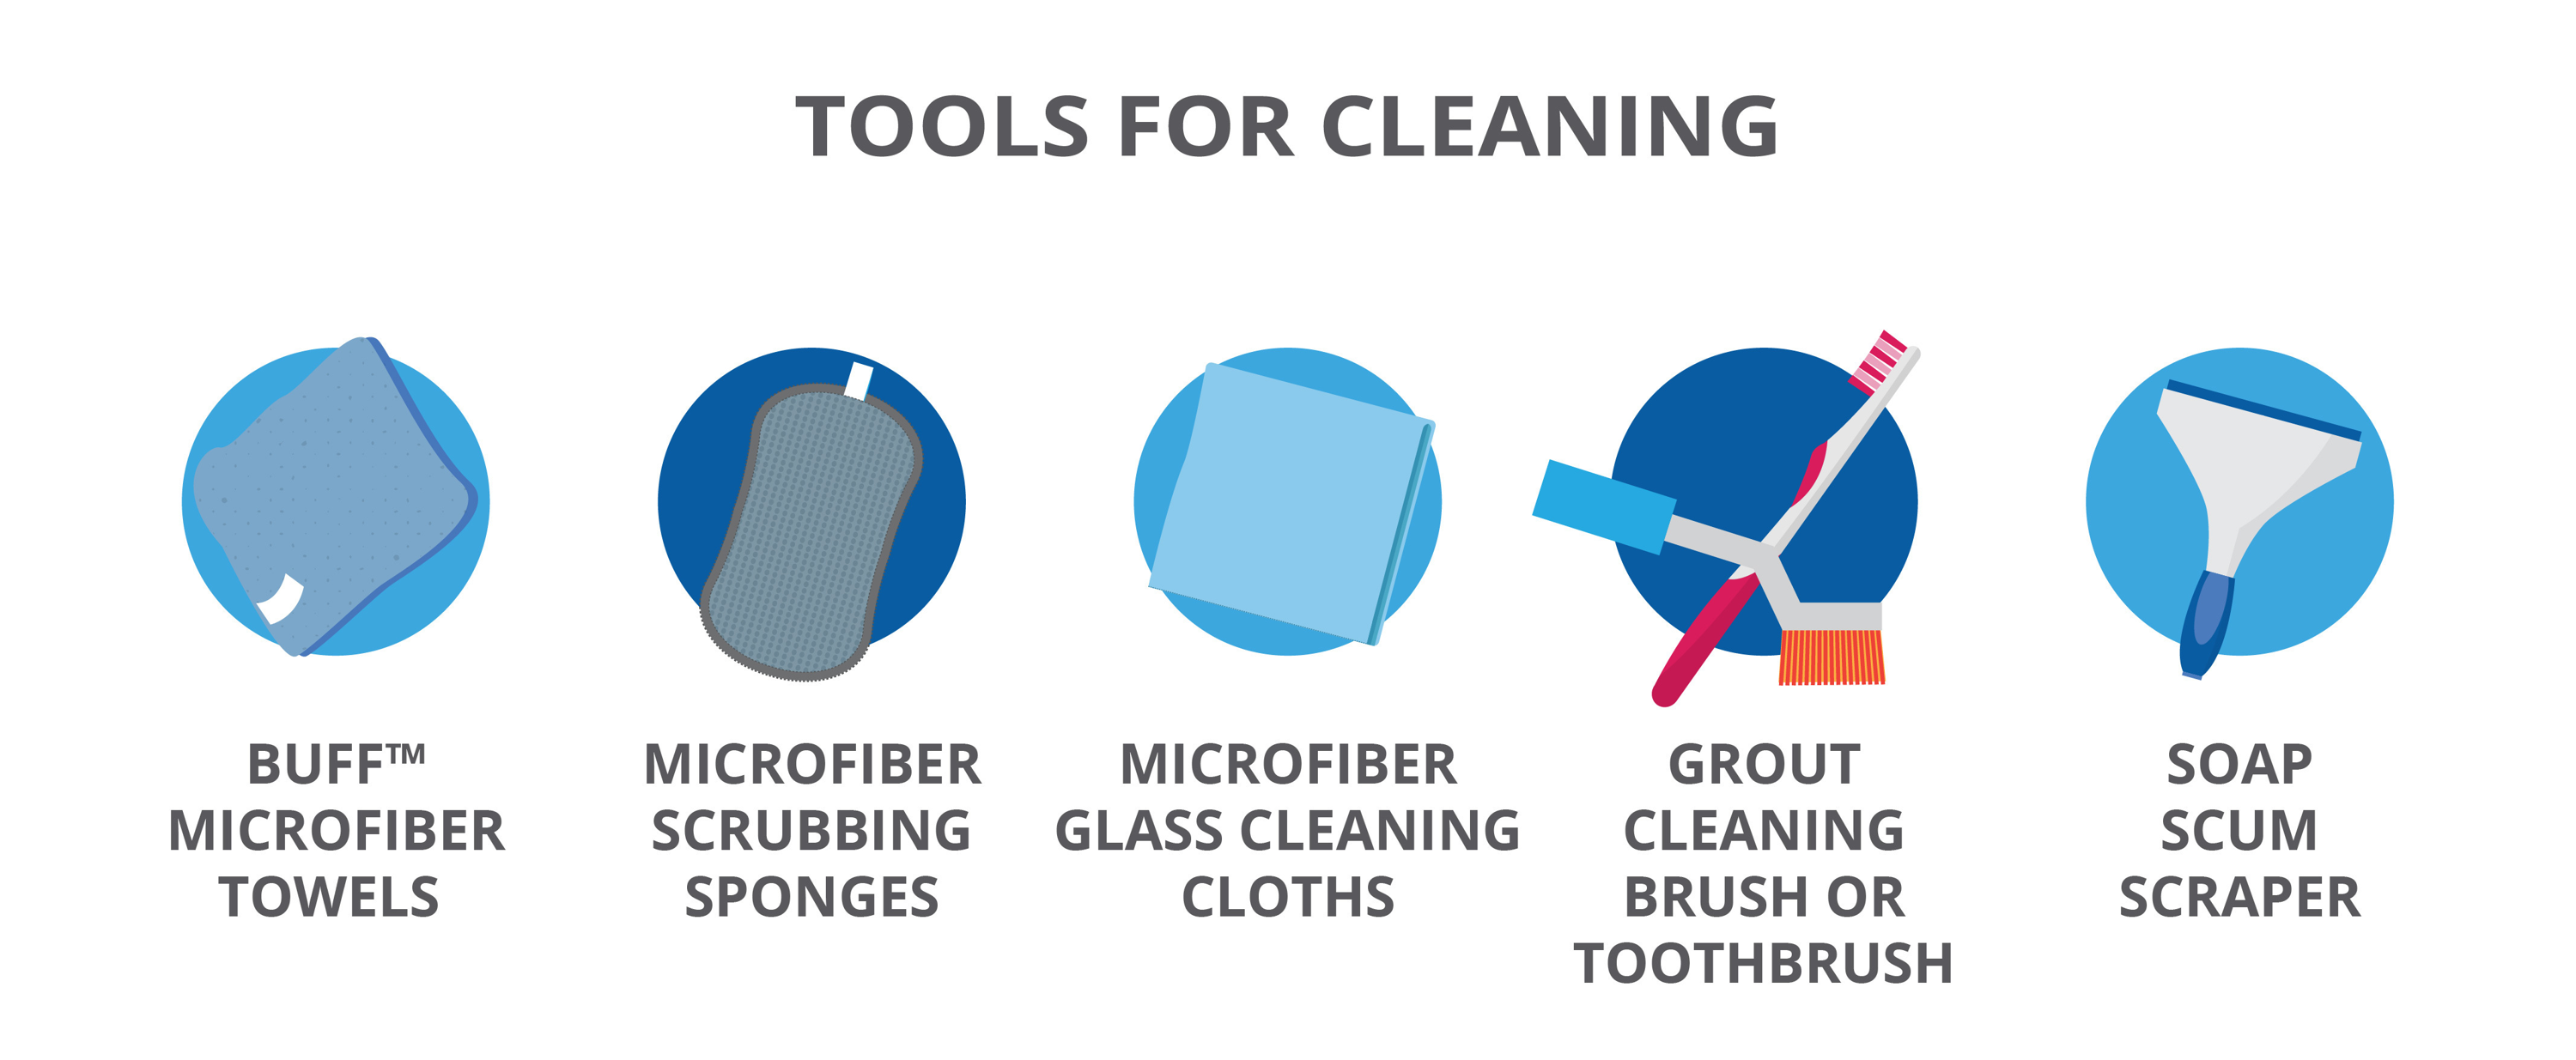 tools for cleaning infographic